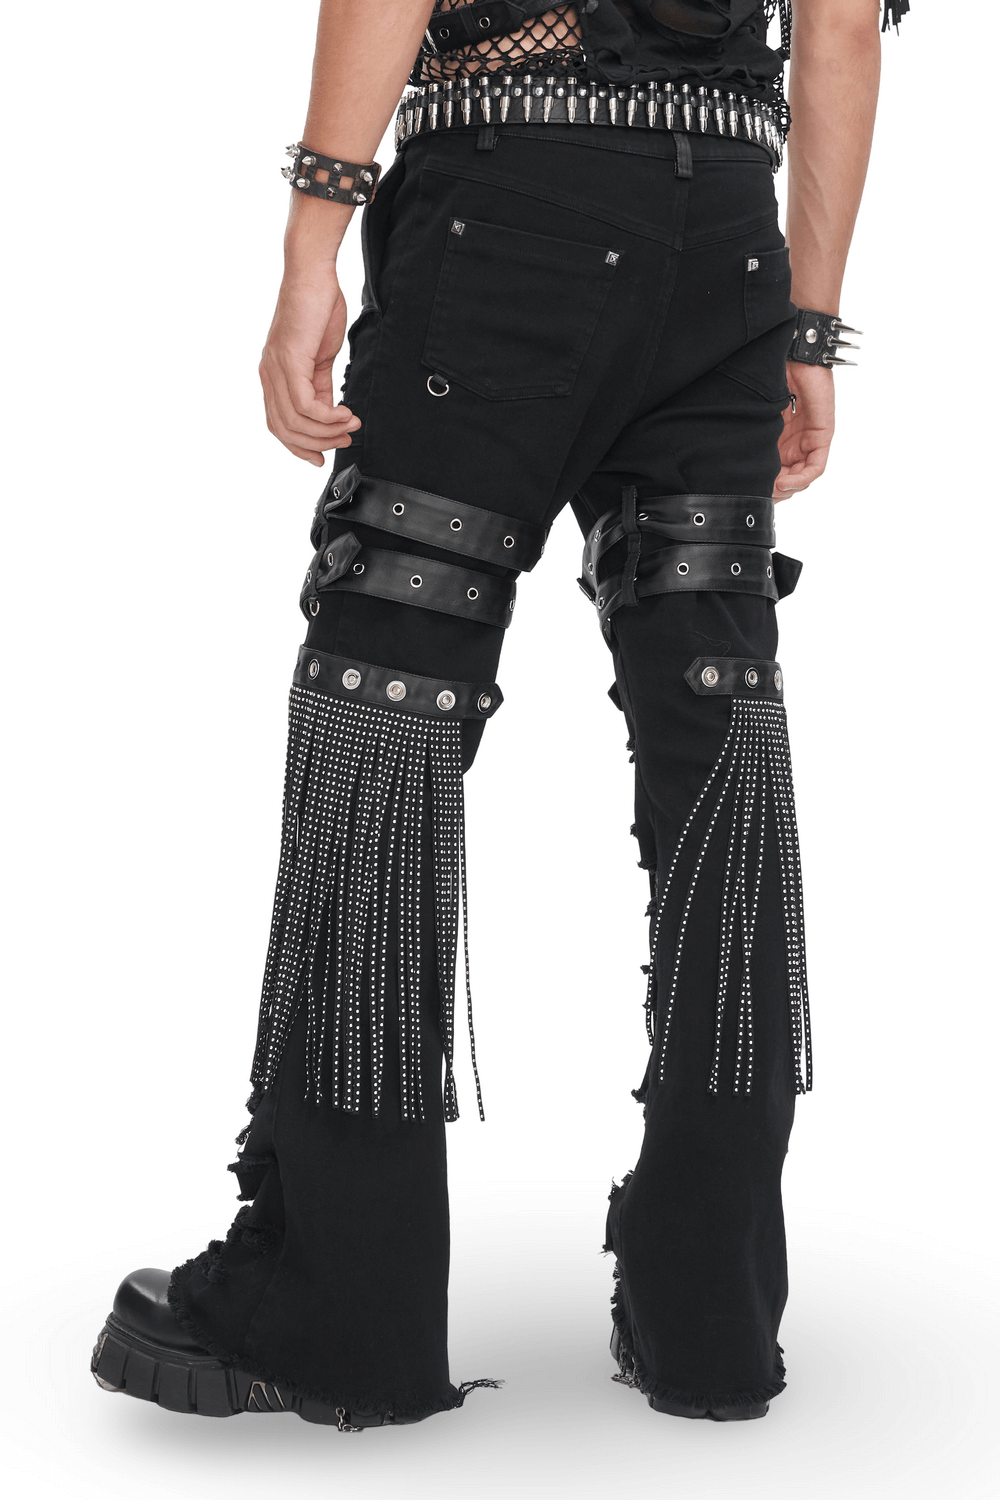 Chic Black Studded Ripped Jeans with Buckle Details